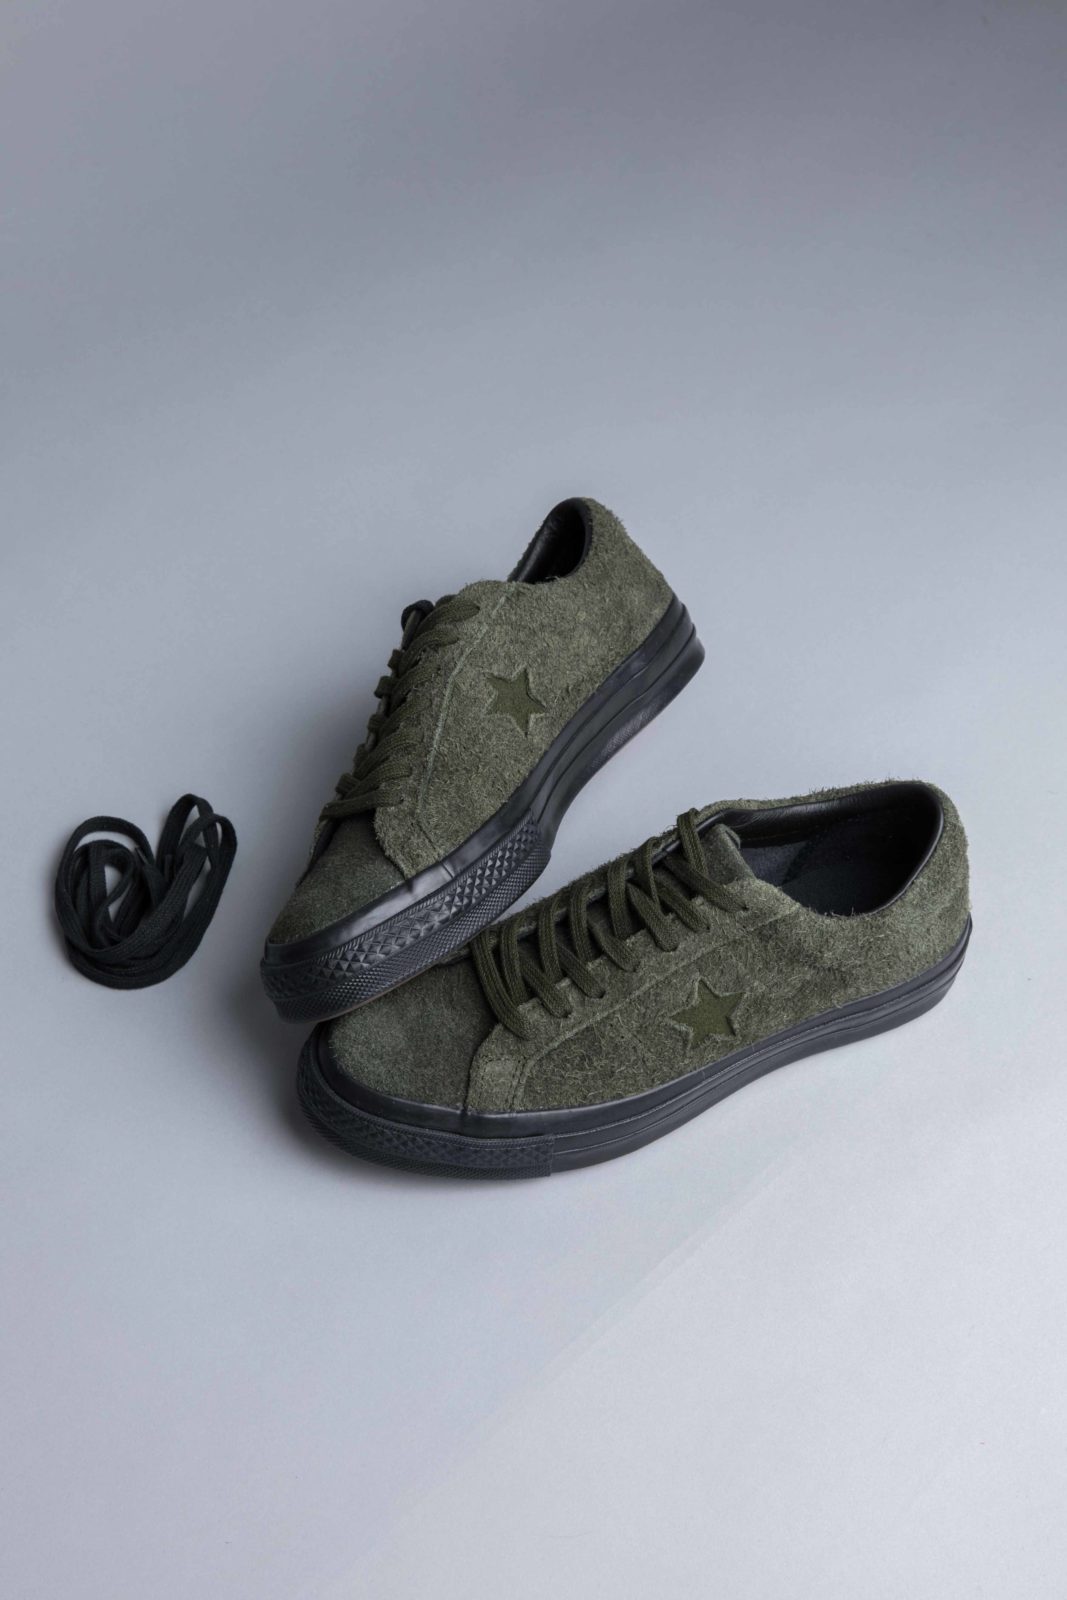 Converse One Star OX Utility Green 